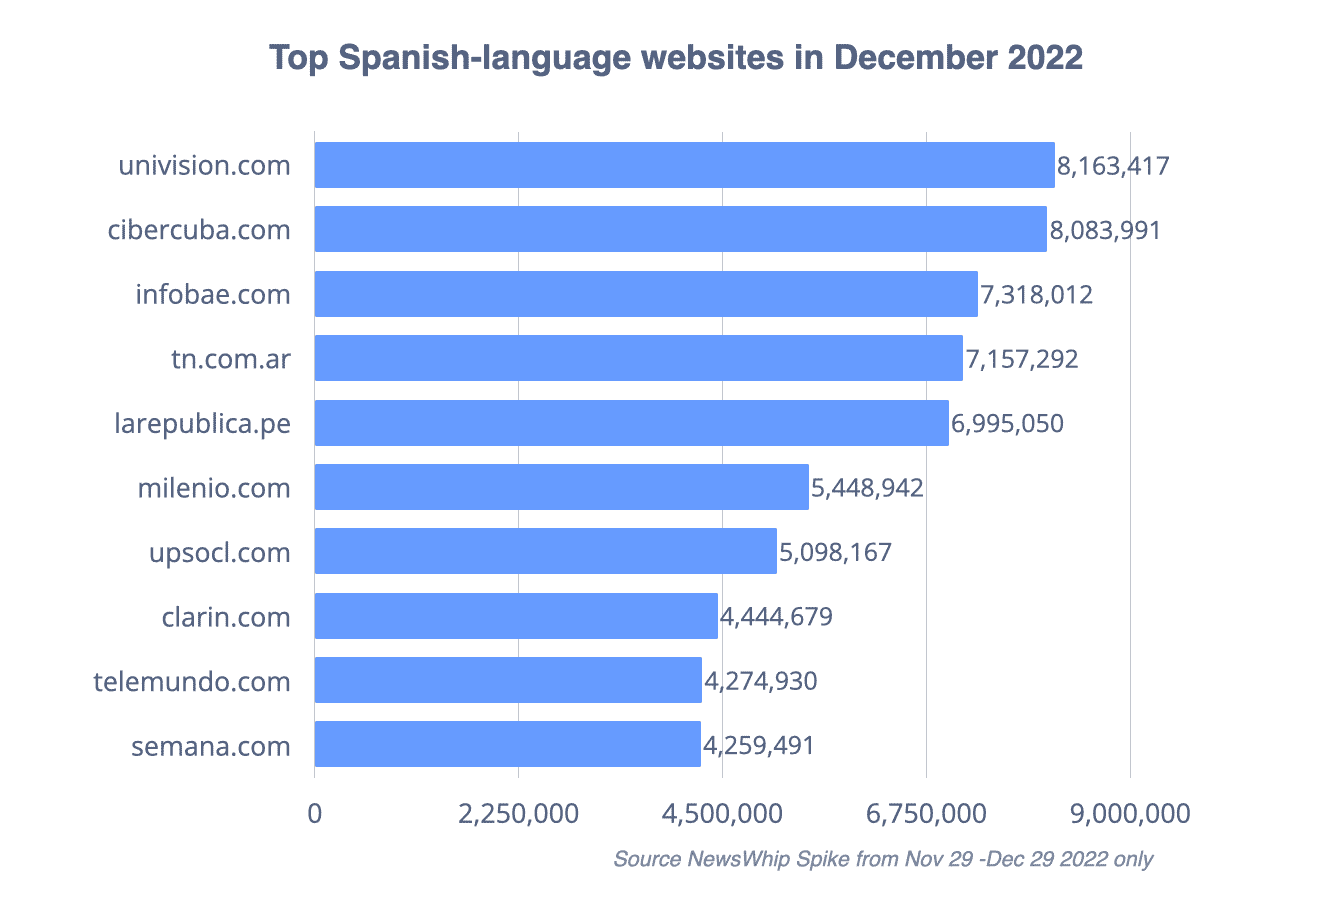 The top Spanish-language articles in December 2022, ranked by engagement